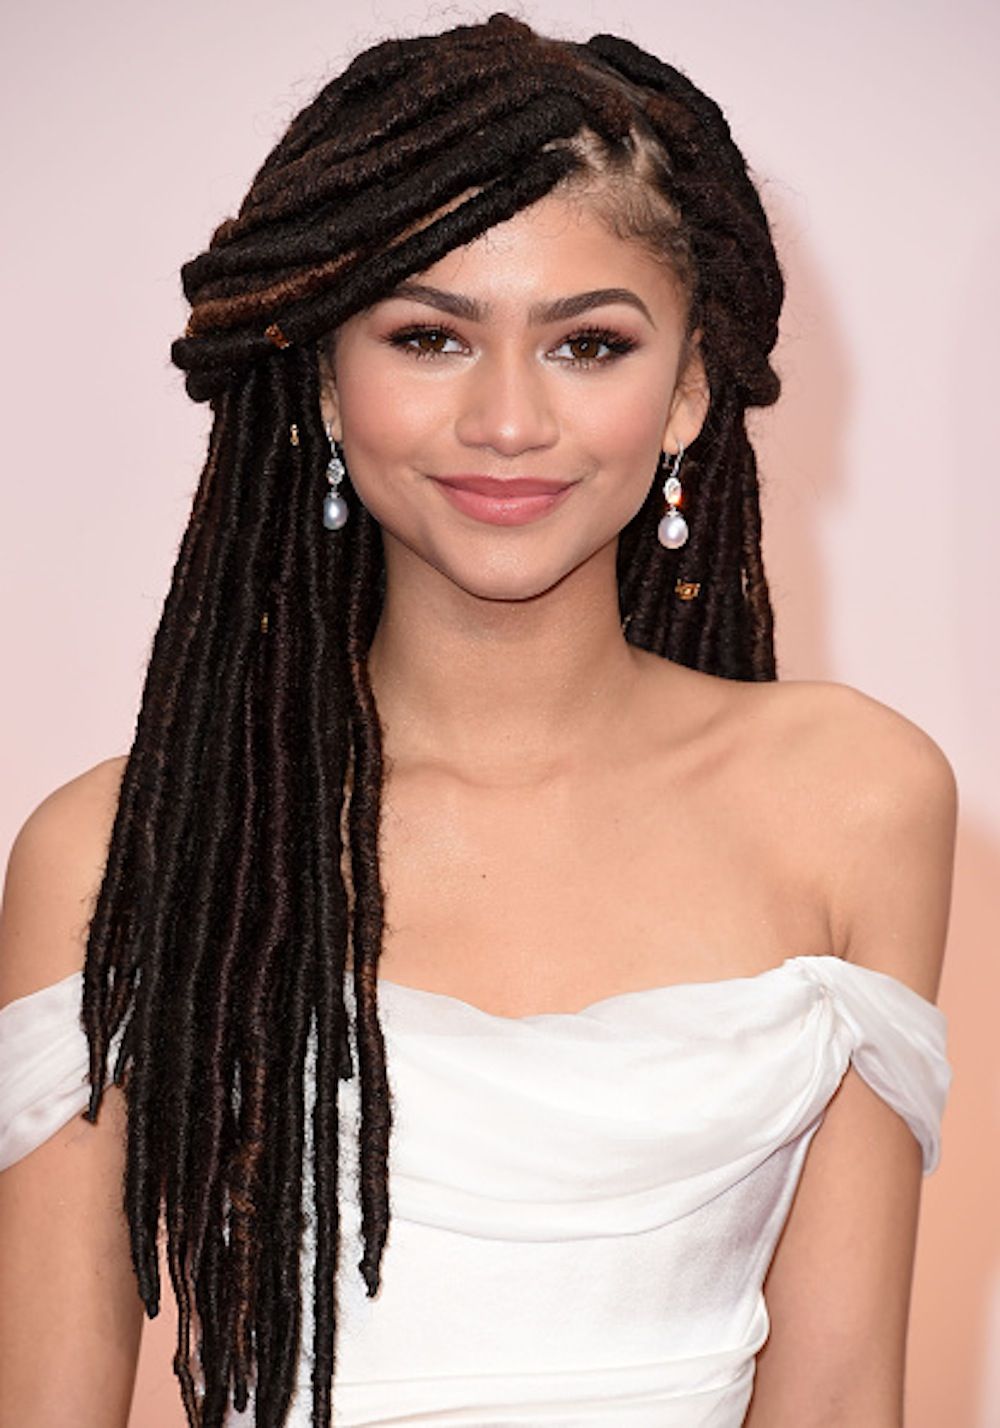 Zendaya S Barbie Doll Looks Exactly Like What You D Expect It To